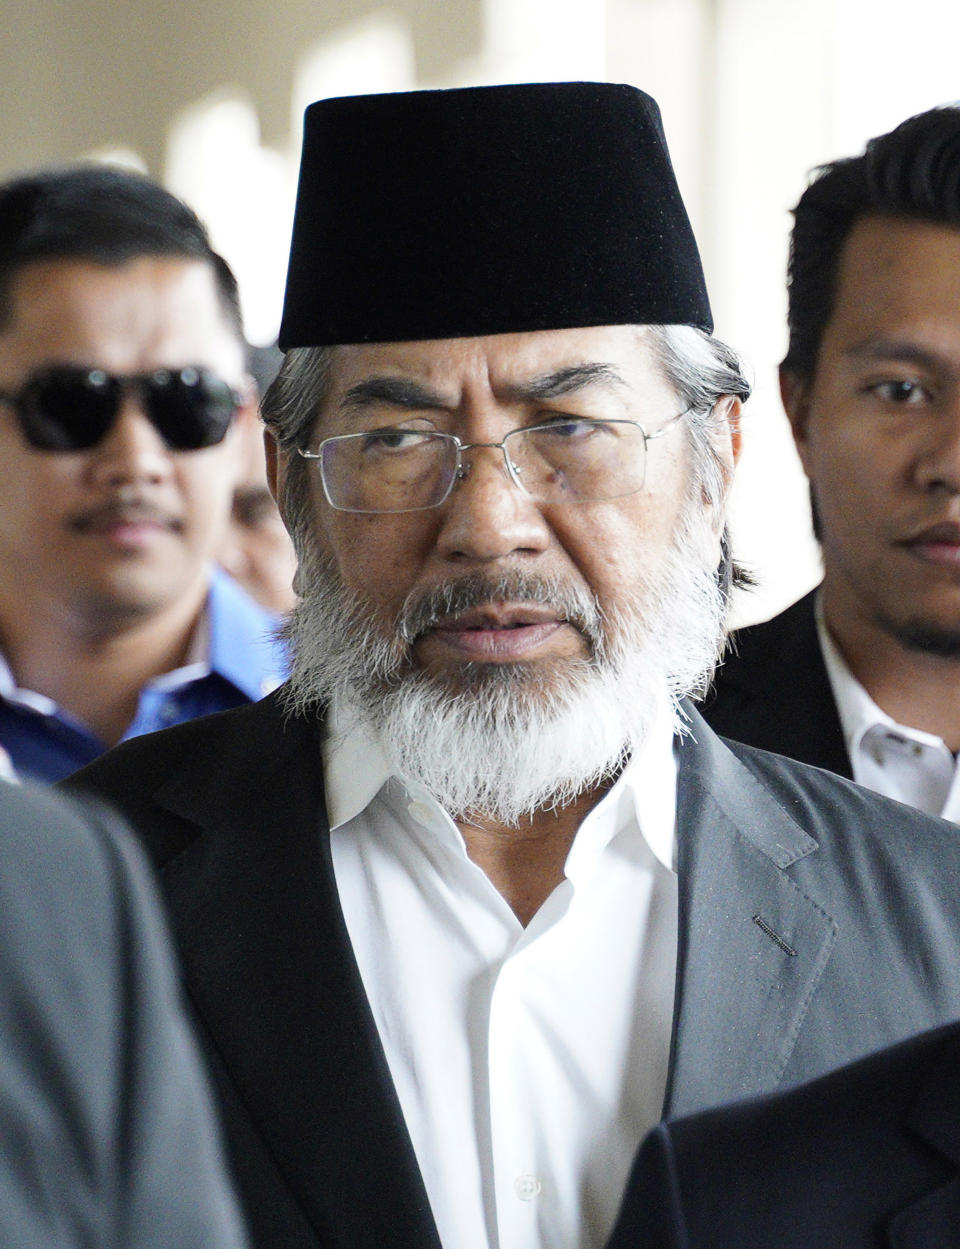 Former chief minister of Saba state on Borneo island, Musa Aman arrives at Kuala Lumpur High Court in Kuala Lumpur, Malaysia, Monday, Nov. 5, 2018. Malaysia's anti-graft agency said Monday that the former leader of a timber-rich eastern state has been arrested and will face corruption charges amid a widening crackdown on abuse by officials. (AP Photo/Yam G-Jun)